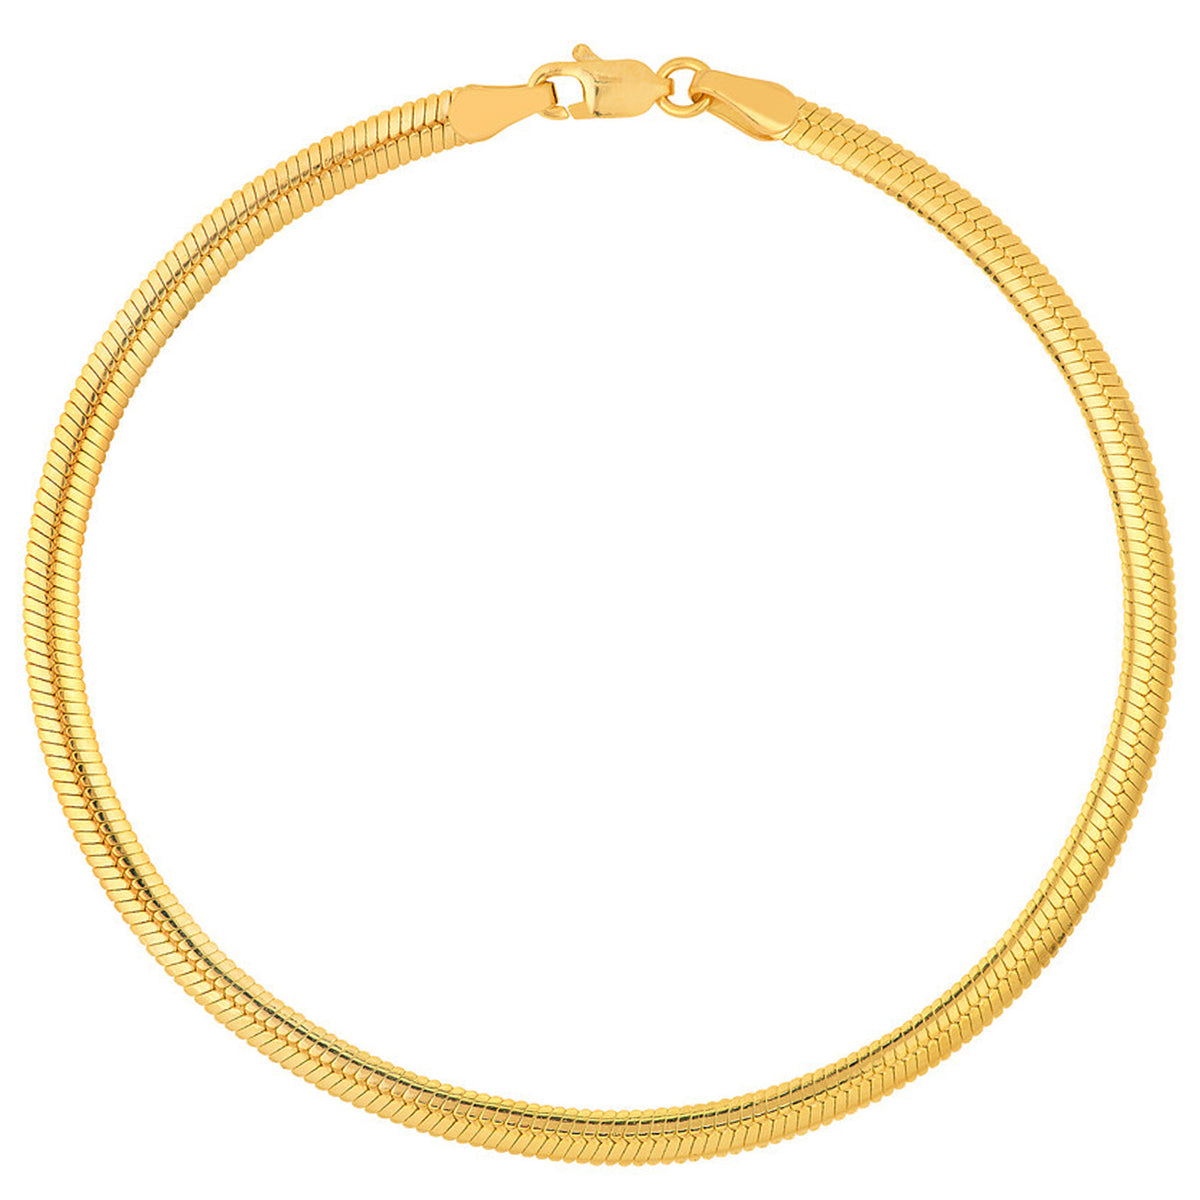 14K Yellow Gold 3mm Oval Snake Chain Bracelet with Lobster Lock, 7.5 Inches